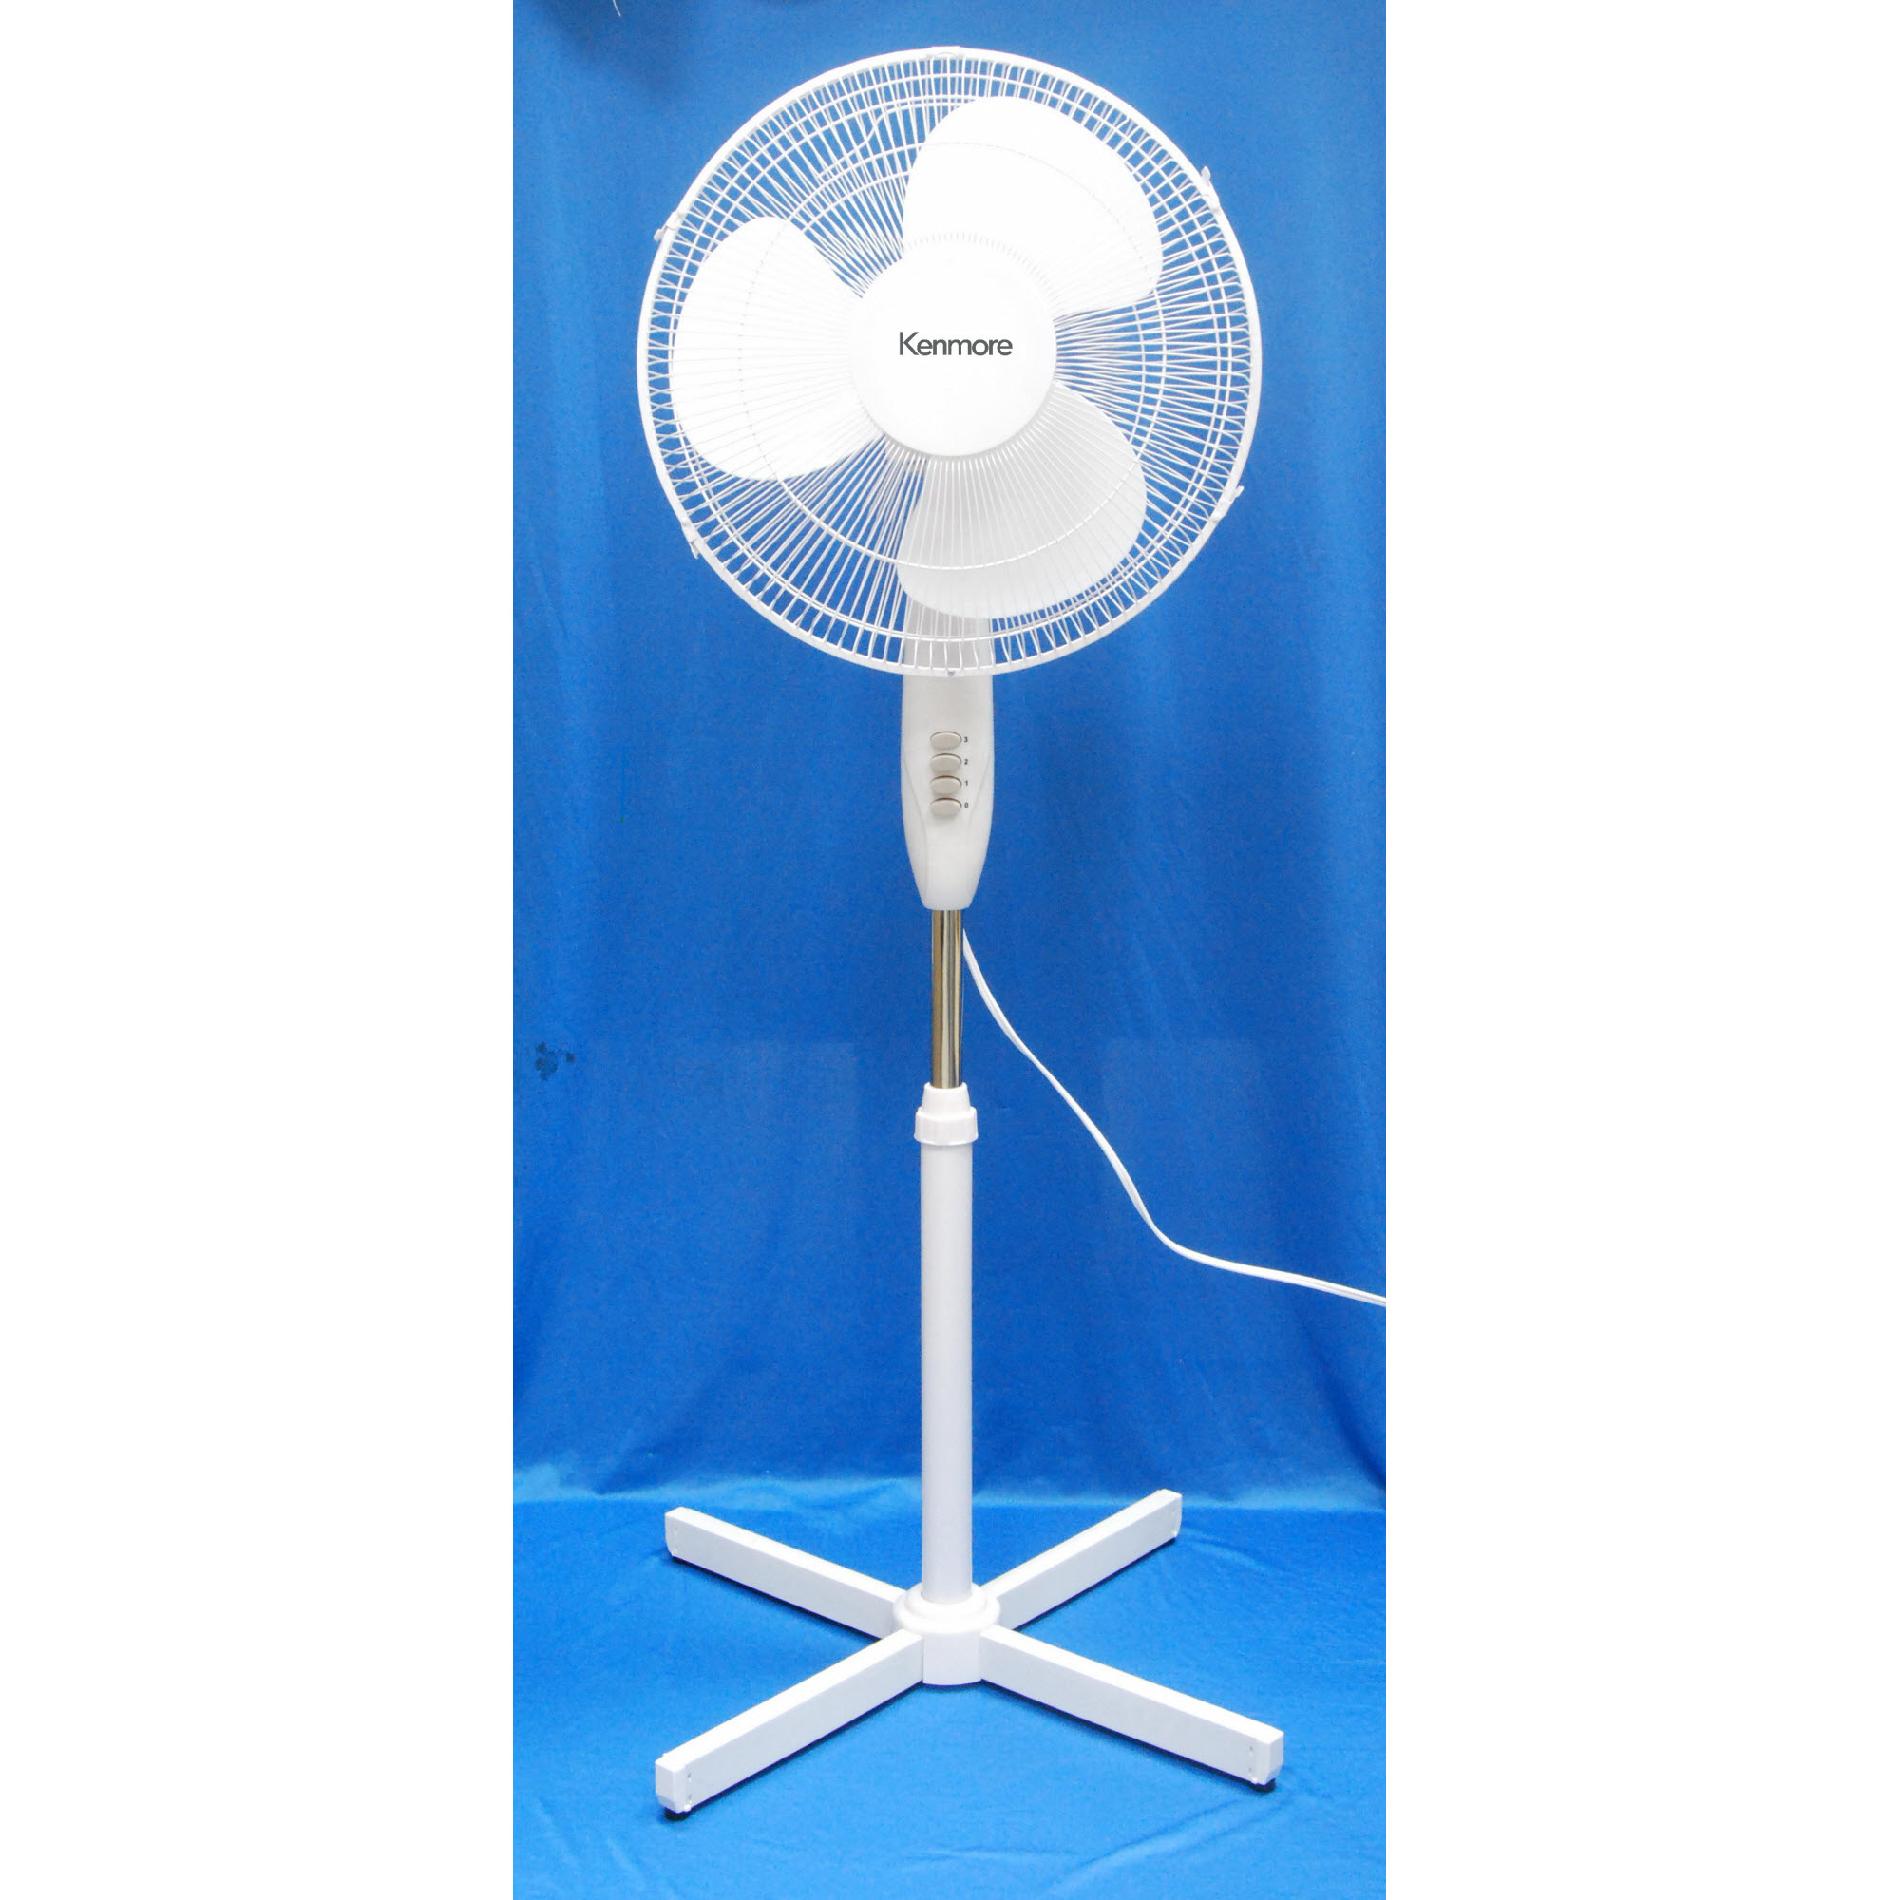 Kenmore 32600 16" Oscillating Stand Fan - White